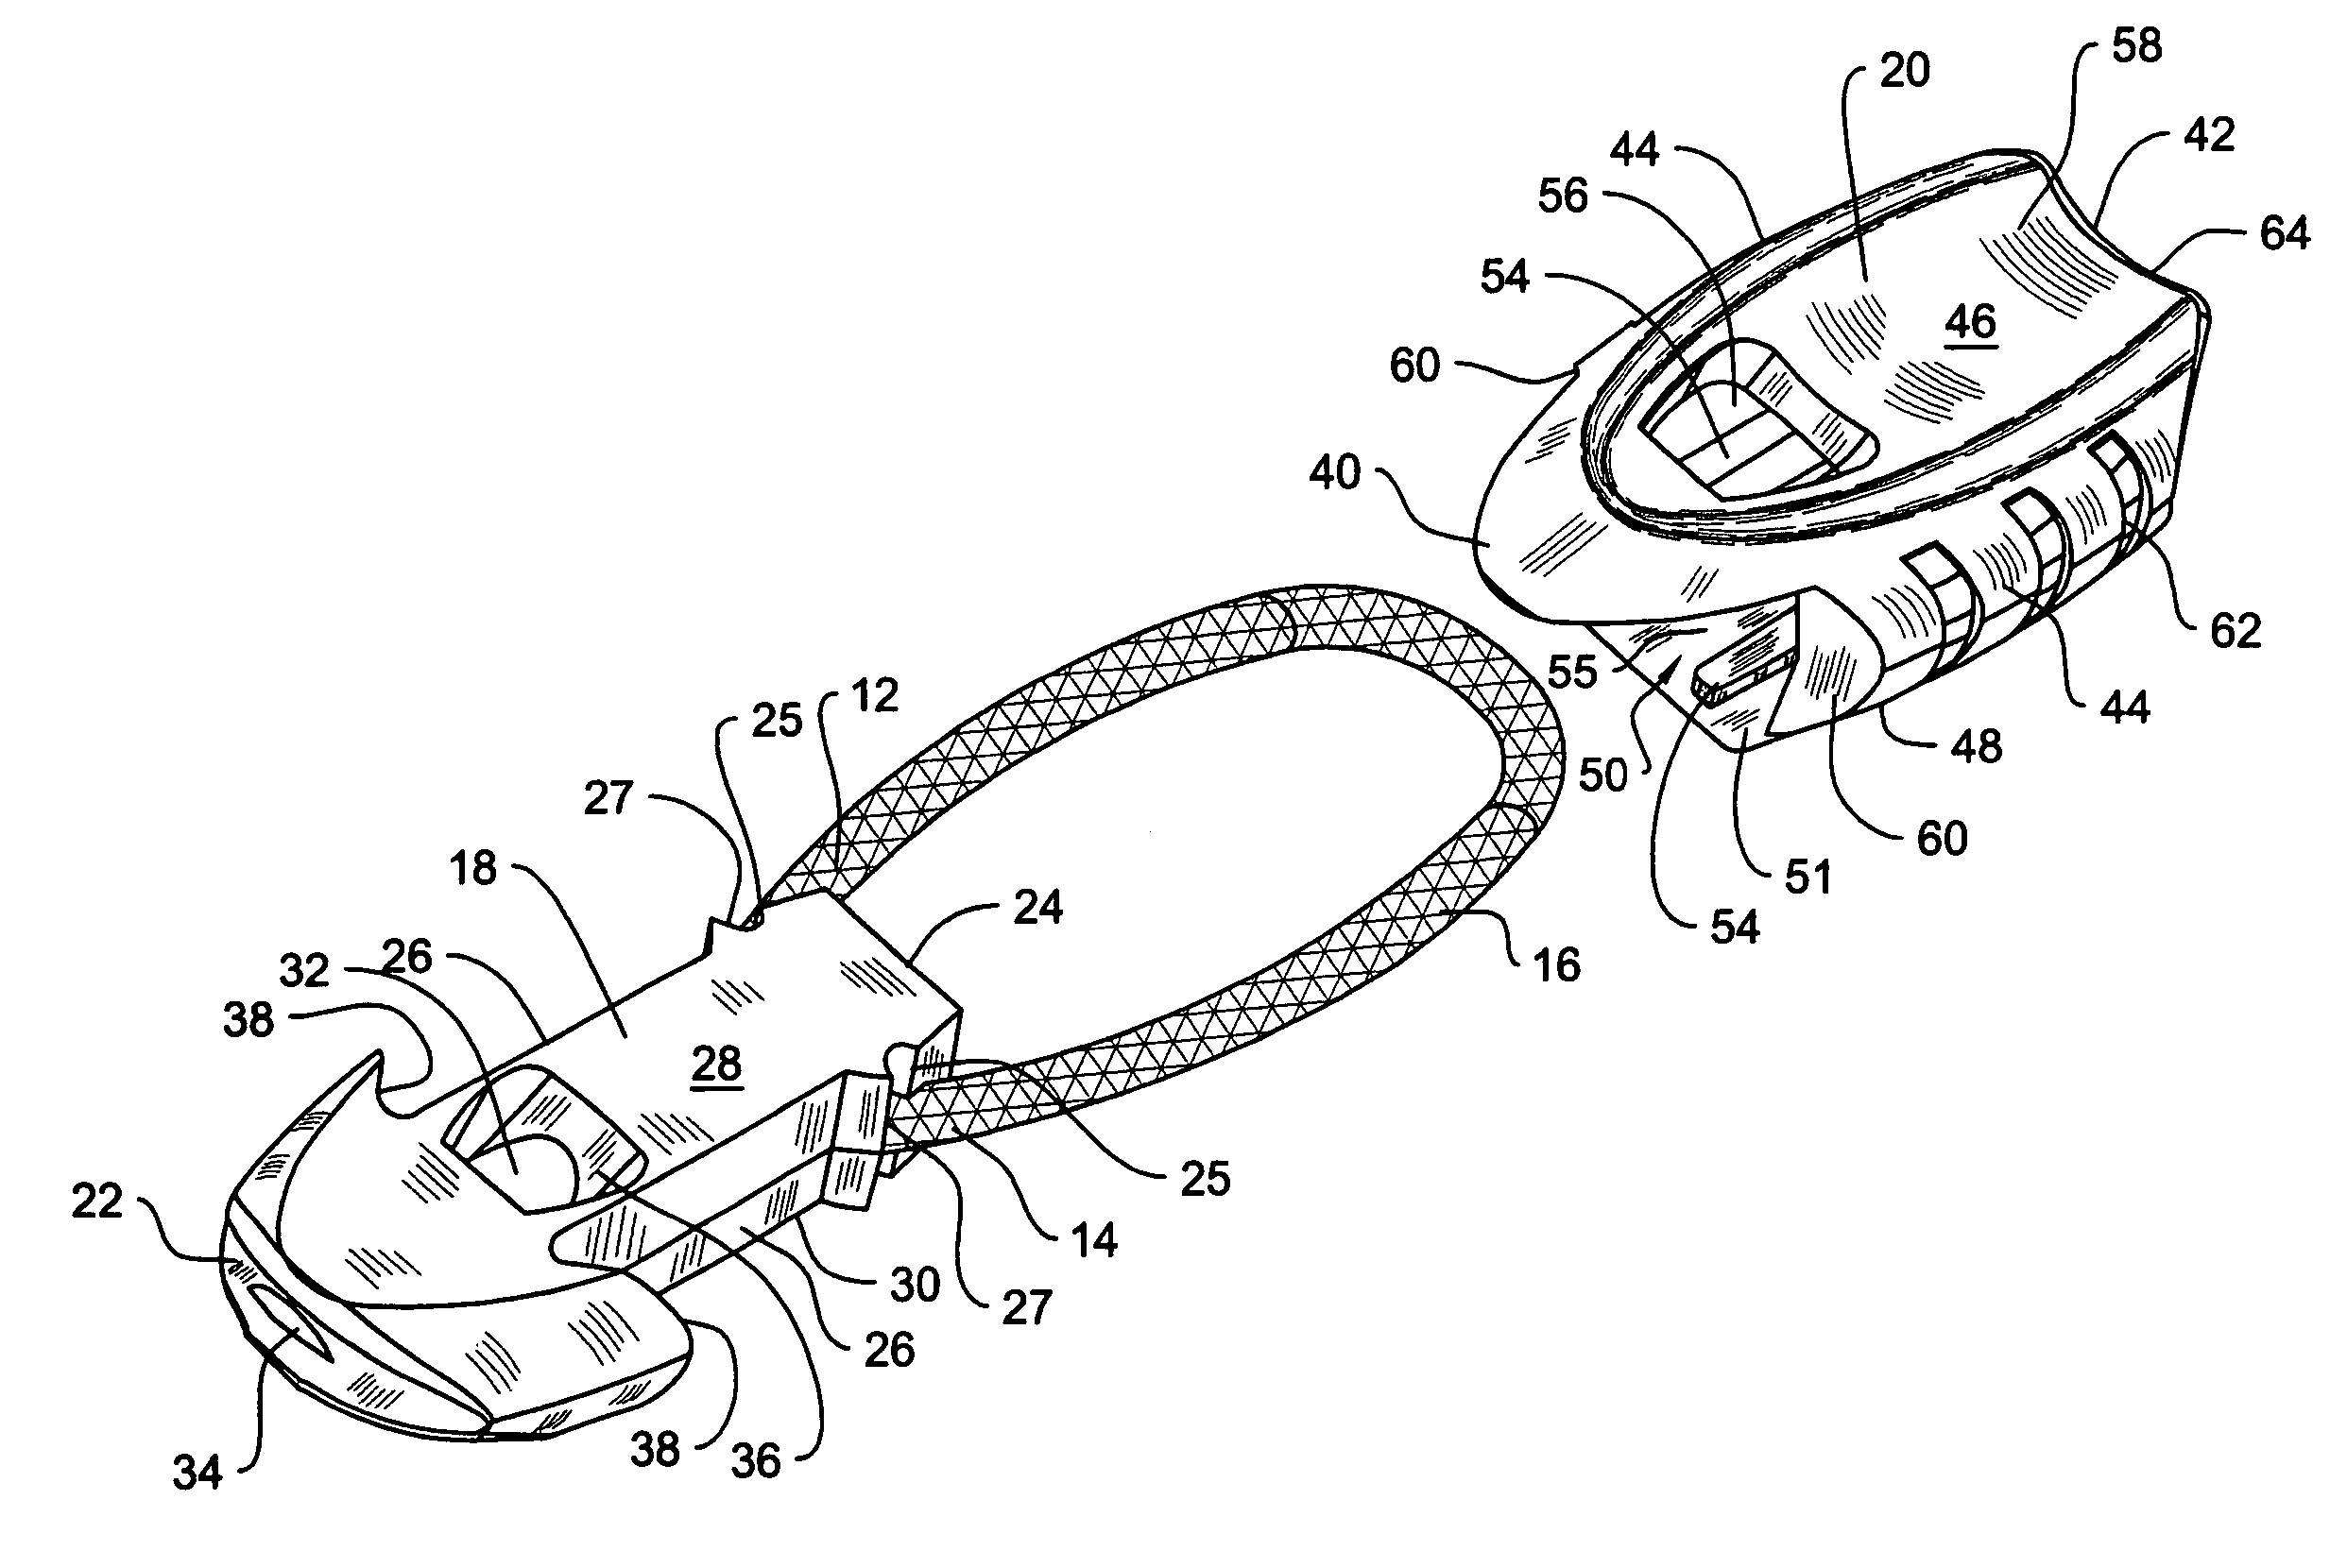 Zipper pull with whistle